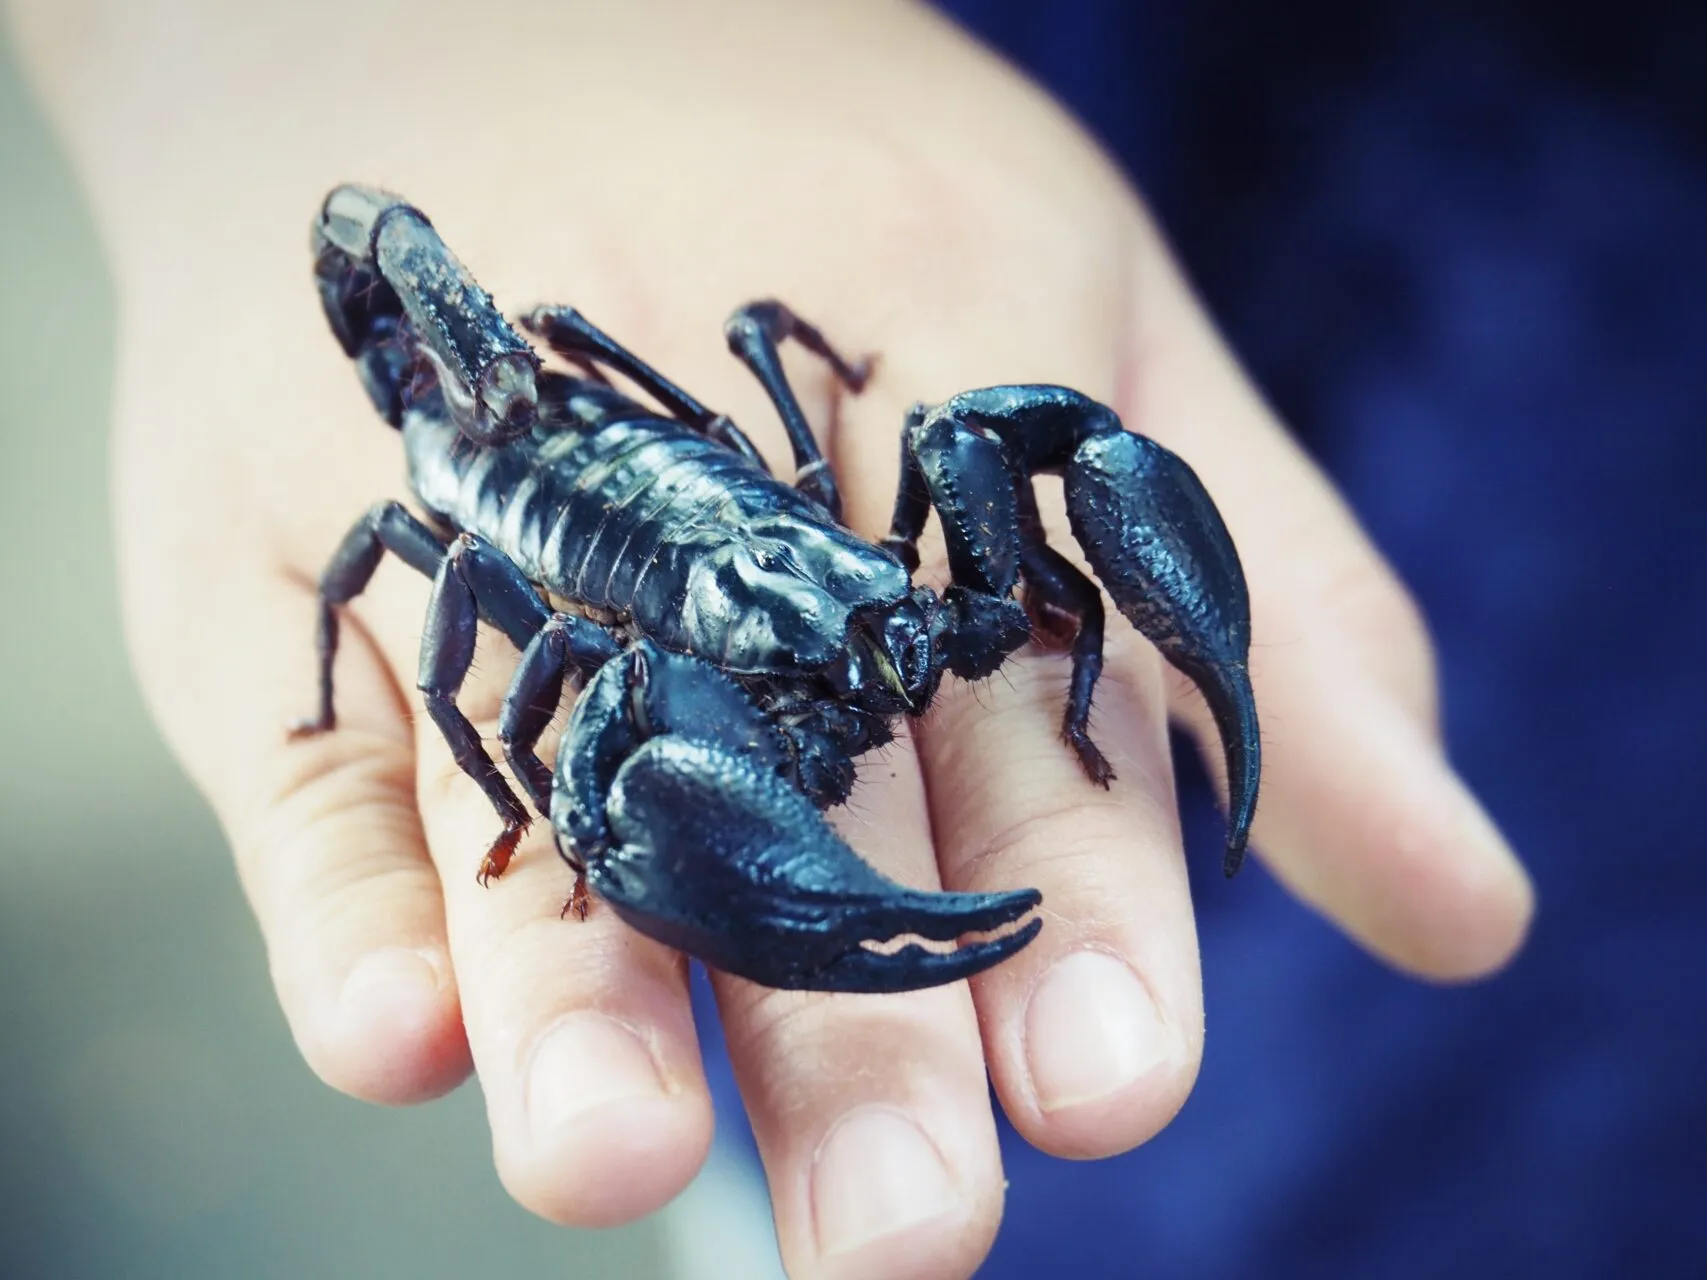 A live giant forest scorpion or Asian forest scorpion is staying on a hand.